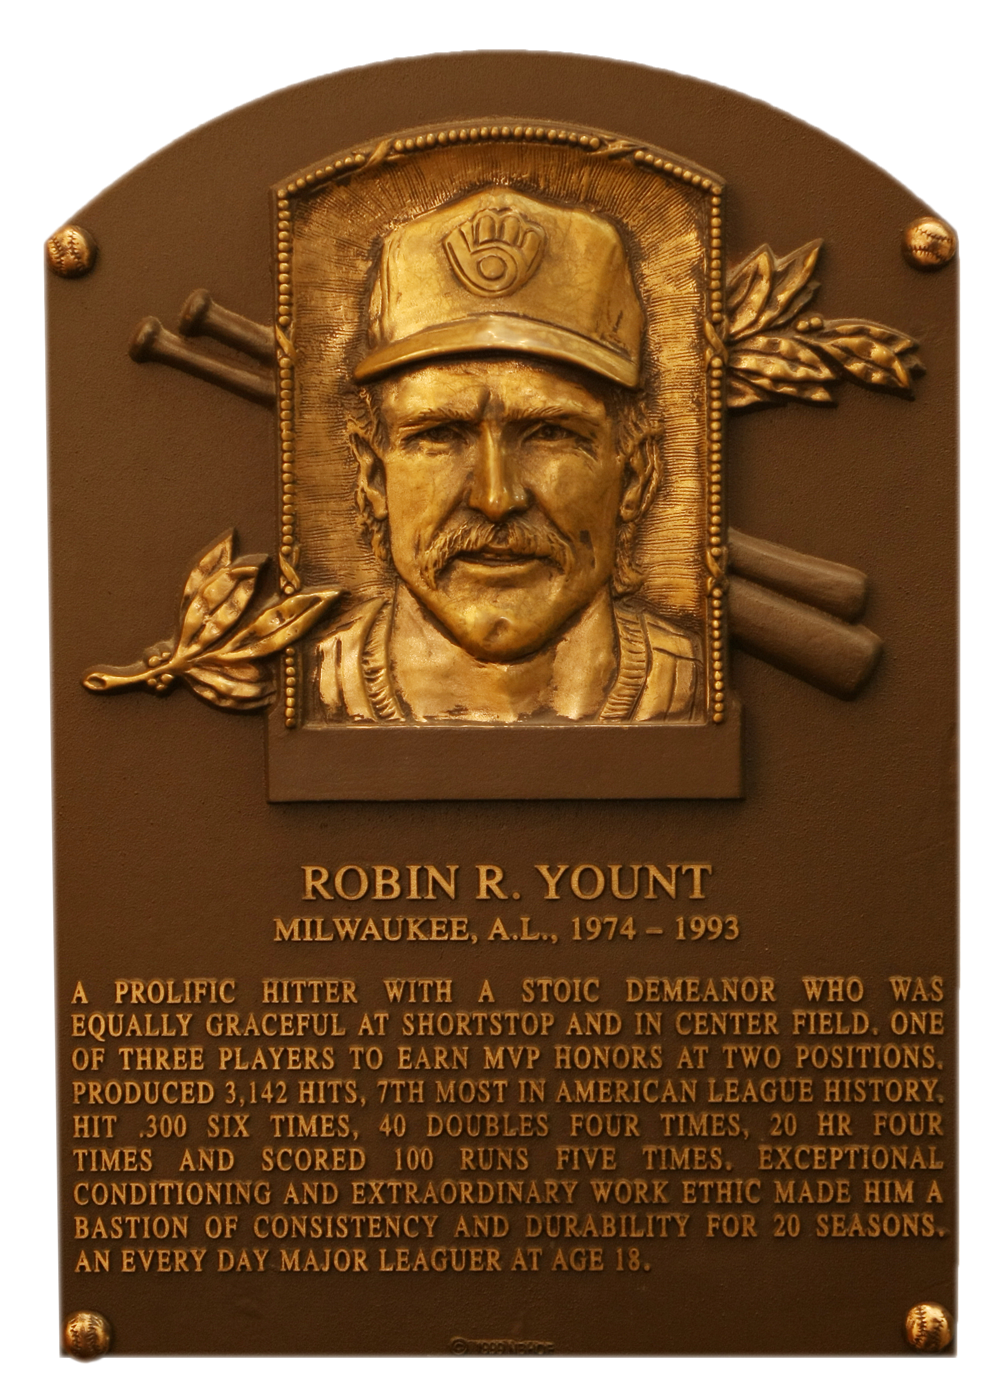 Robin Yount Hall of Fame plaque